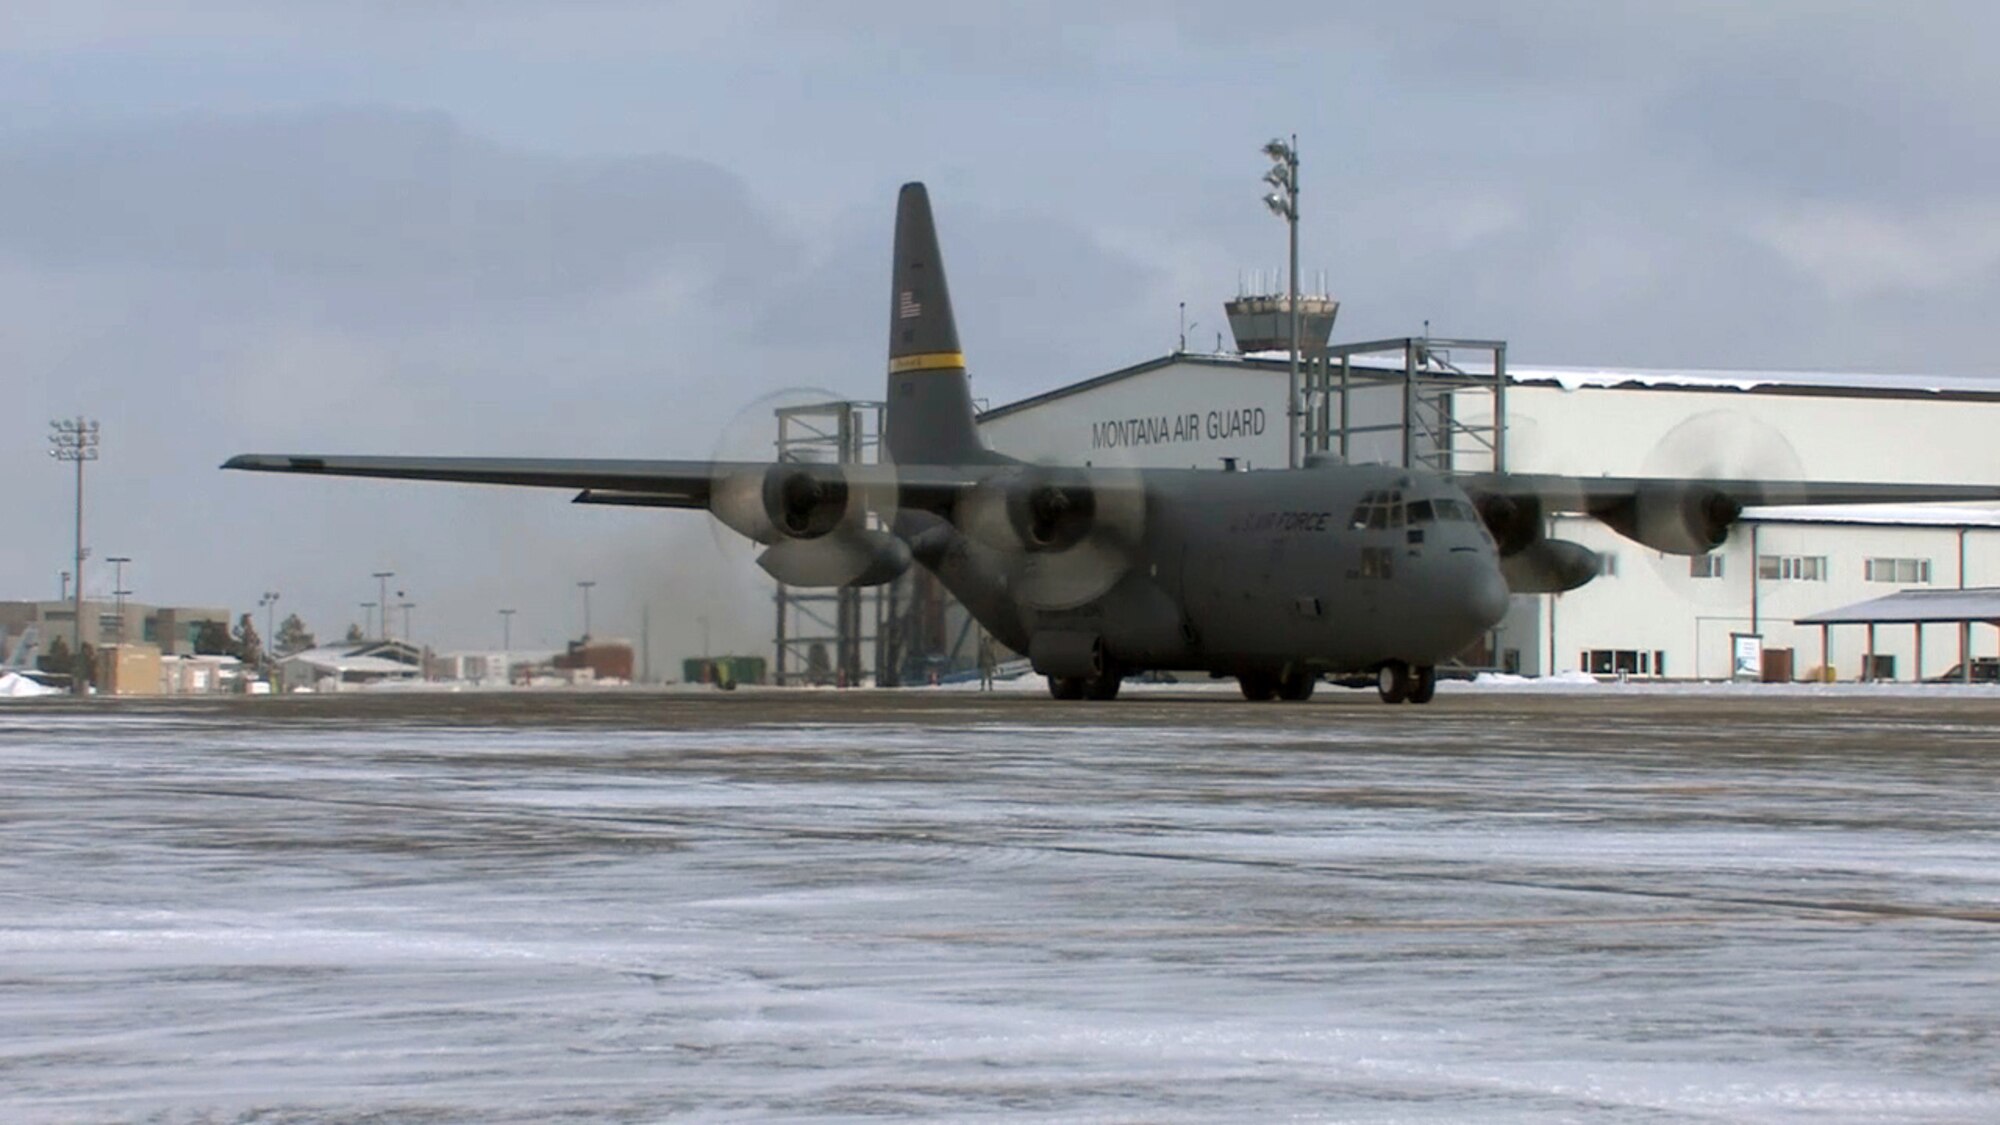 A 153rd Airlift Wing C-130 Hercules cargo aircraft of Wyoming Air National Guard taxis in front of a Montana ANG building at the 120th Fighter Wing, Great Falls, Mont., Feb. 8, 2014. The WY ANG visited the MT ANG to train their personnel in new career fields as the unit transitions from F-16 fighters to C-130 cargo missions. Because the two units experience similar weather Wyoming personnel were able to give advice on what it is like to fly missions in windy, cold conditions. (U.S. Air Force photo extracted from video by Senior Airman Nik Asmussen)
